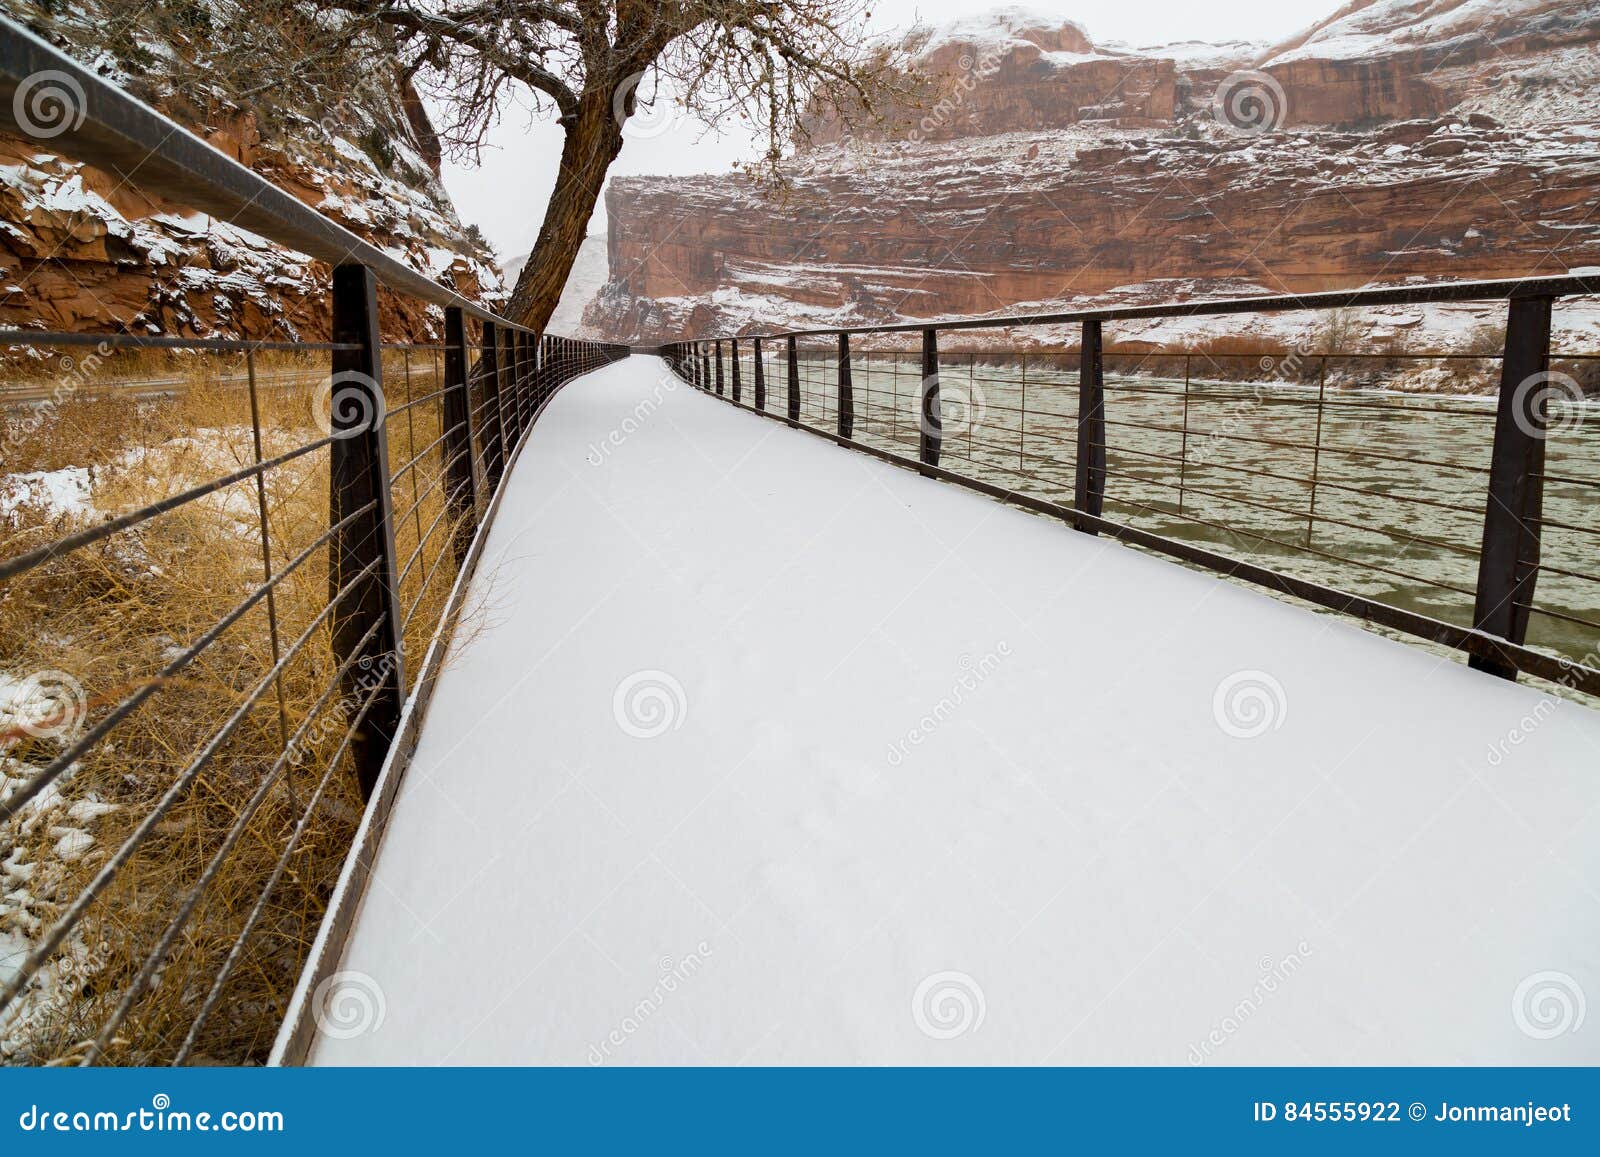 Snow Covered Path stock photo. Image of path, landscape - 84555922